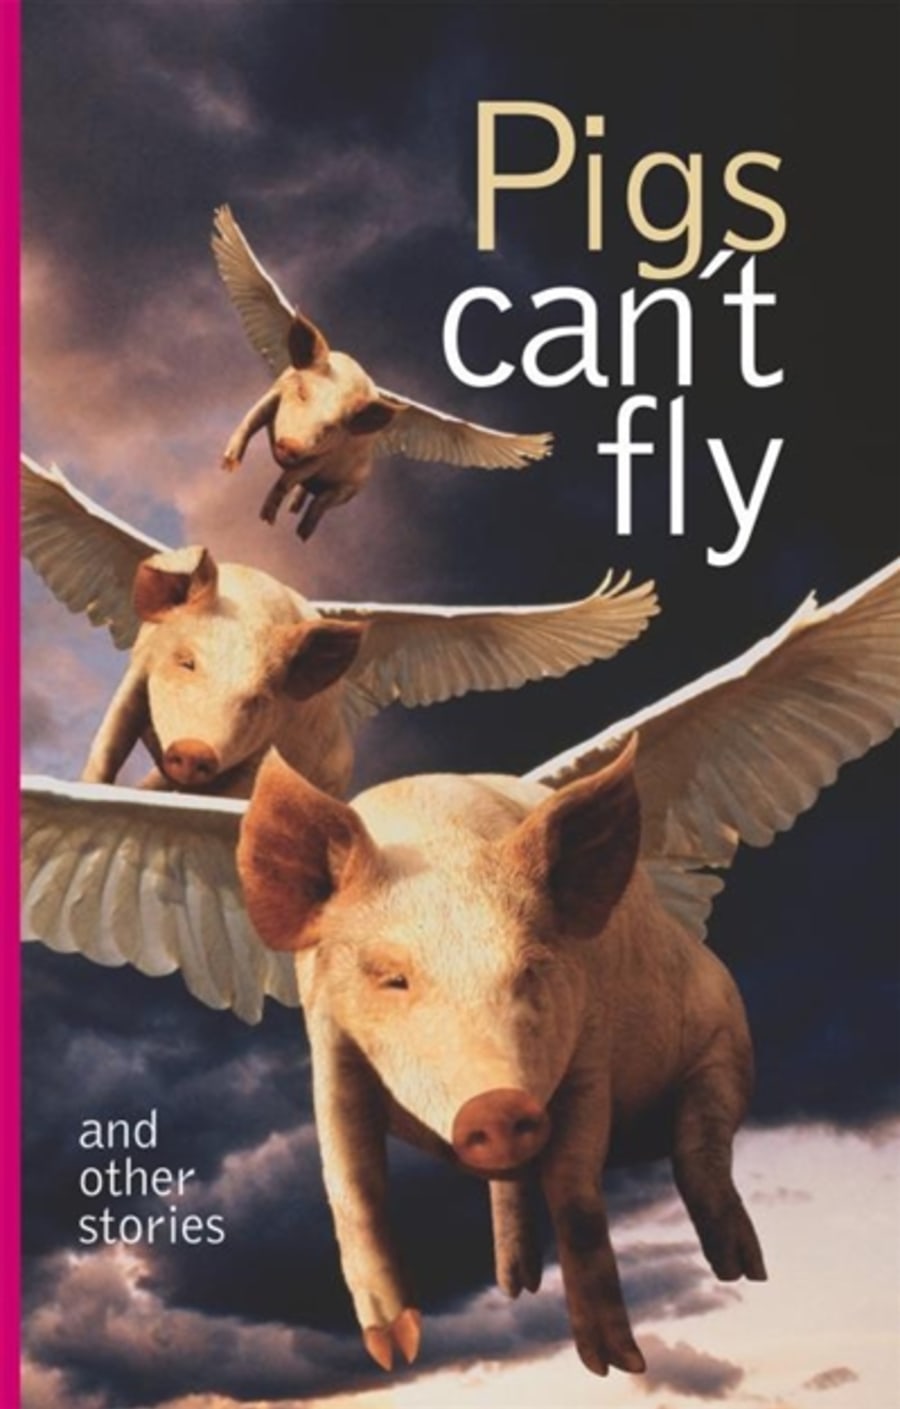 Pigs can't fly & other stories